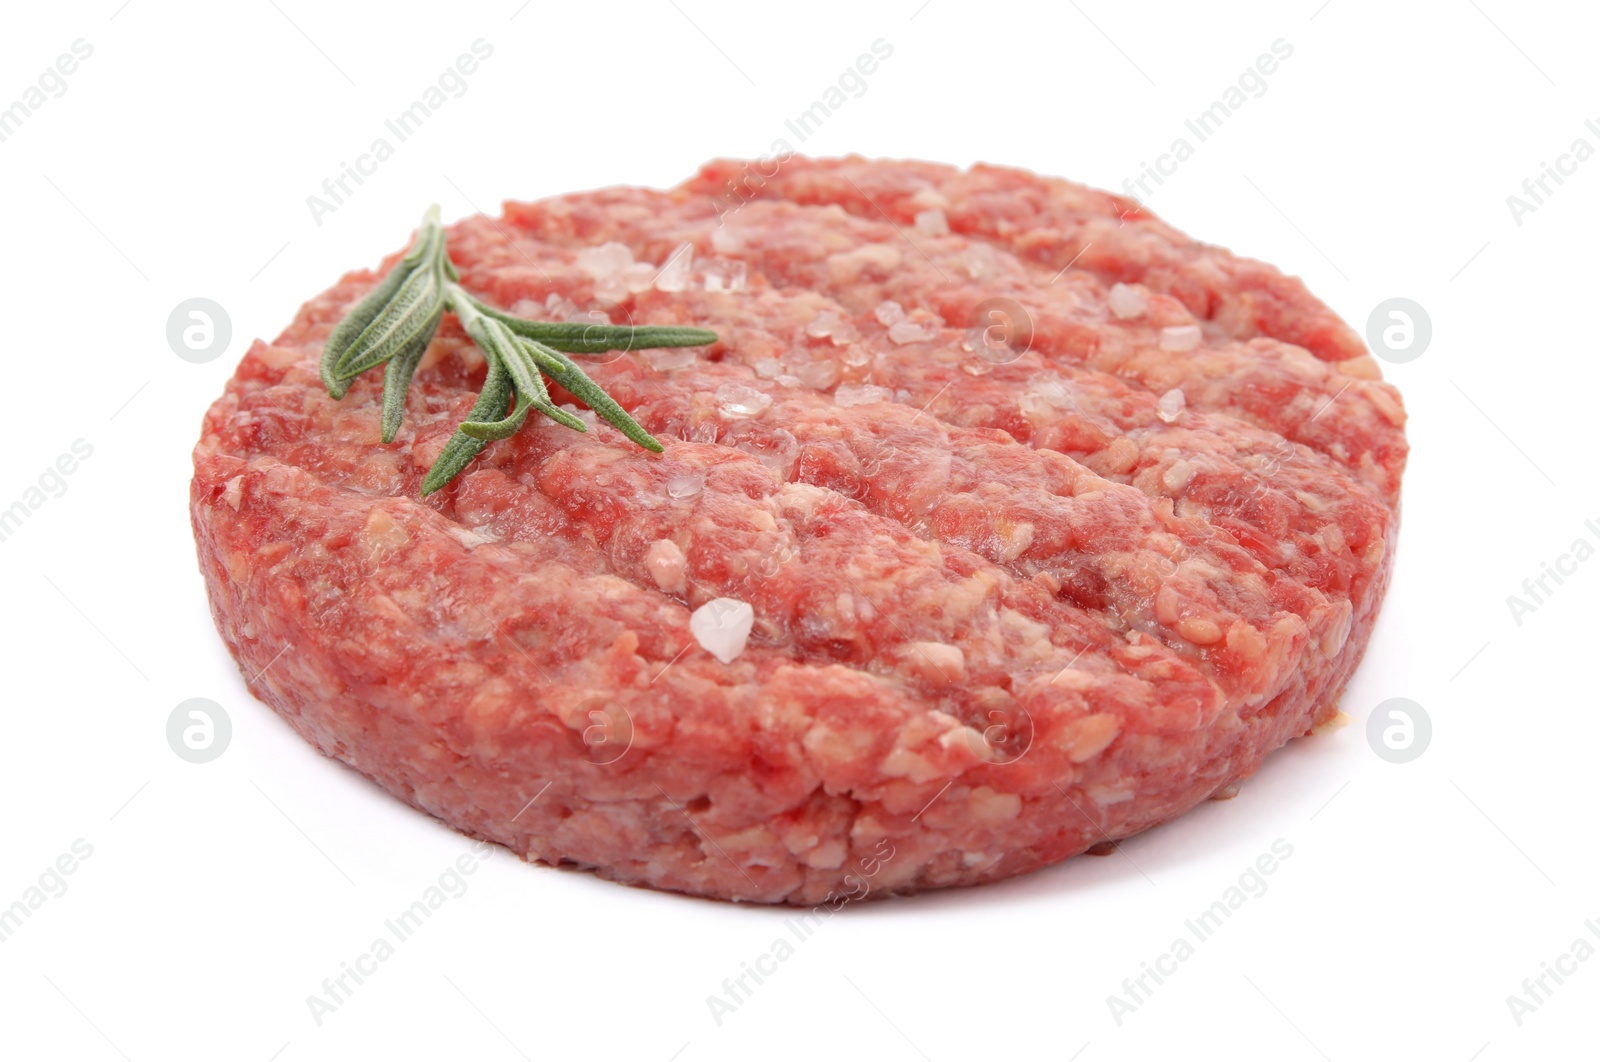 Photo of Raw hamburger patty with rosemary and salt isolated on white